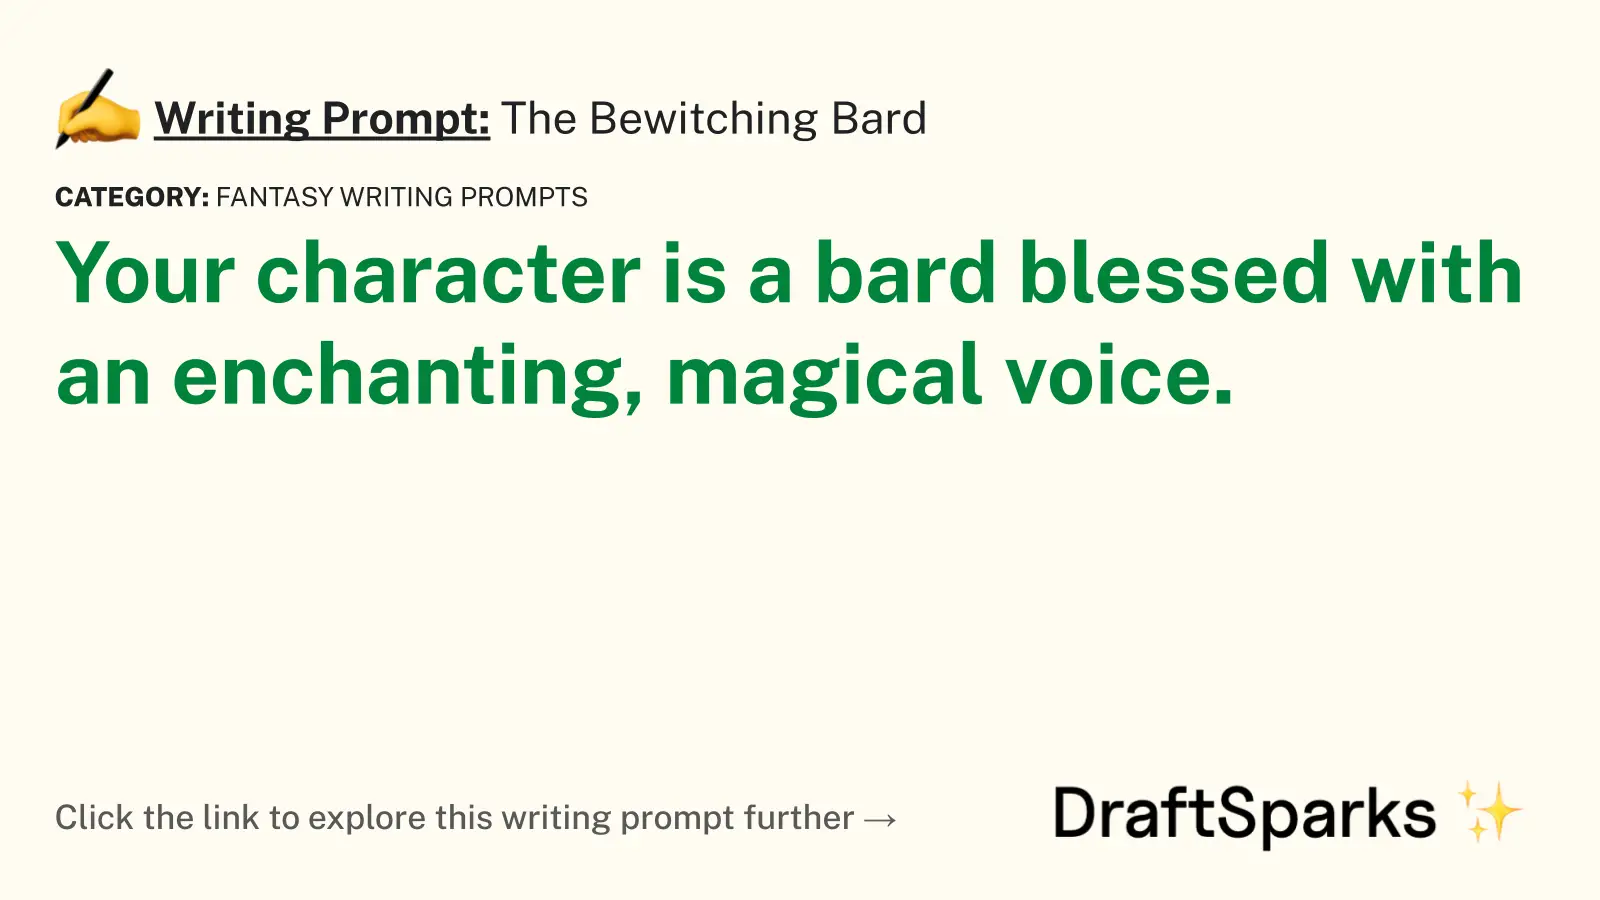 The Bewitching Bard